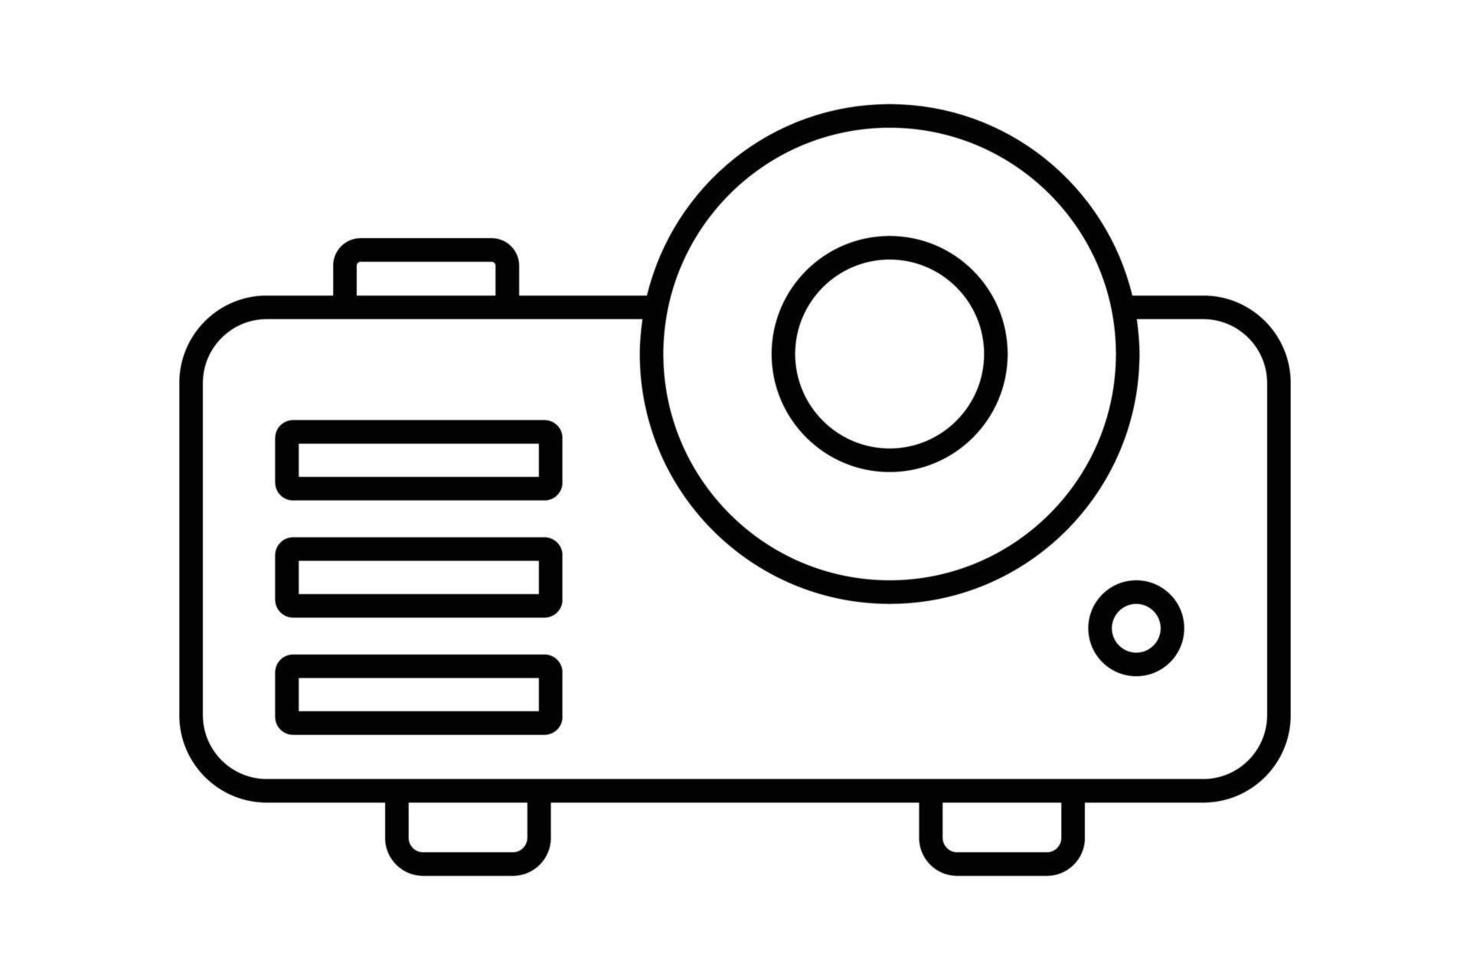 Projector icon illustration. icon related to multimedia. Line icon style. Simple vector design editable